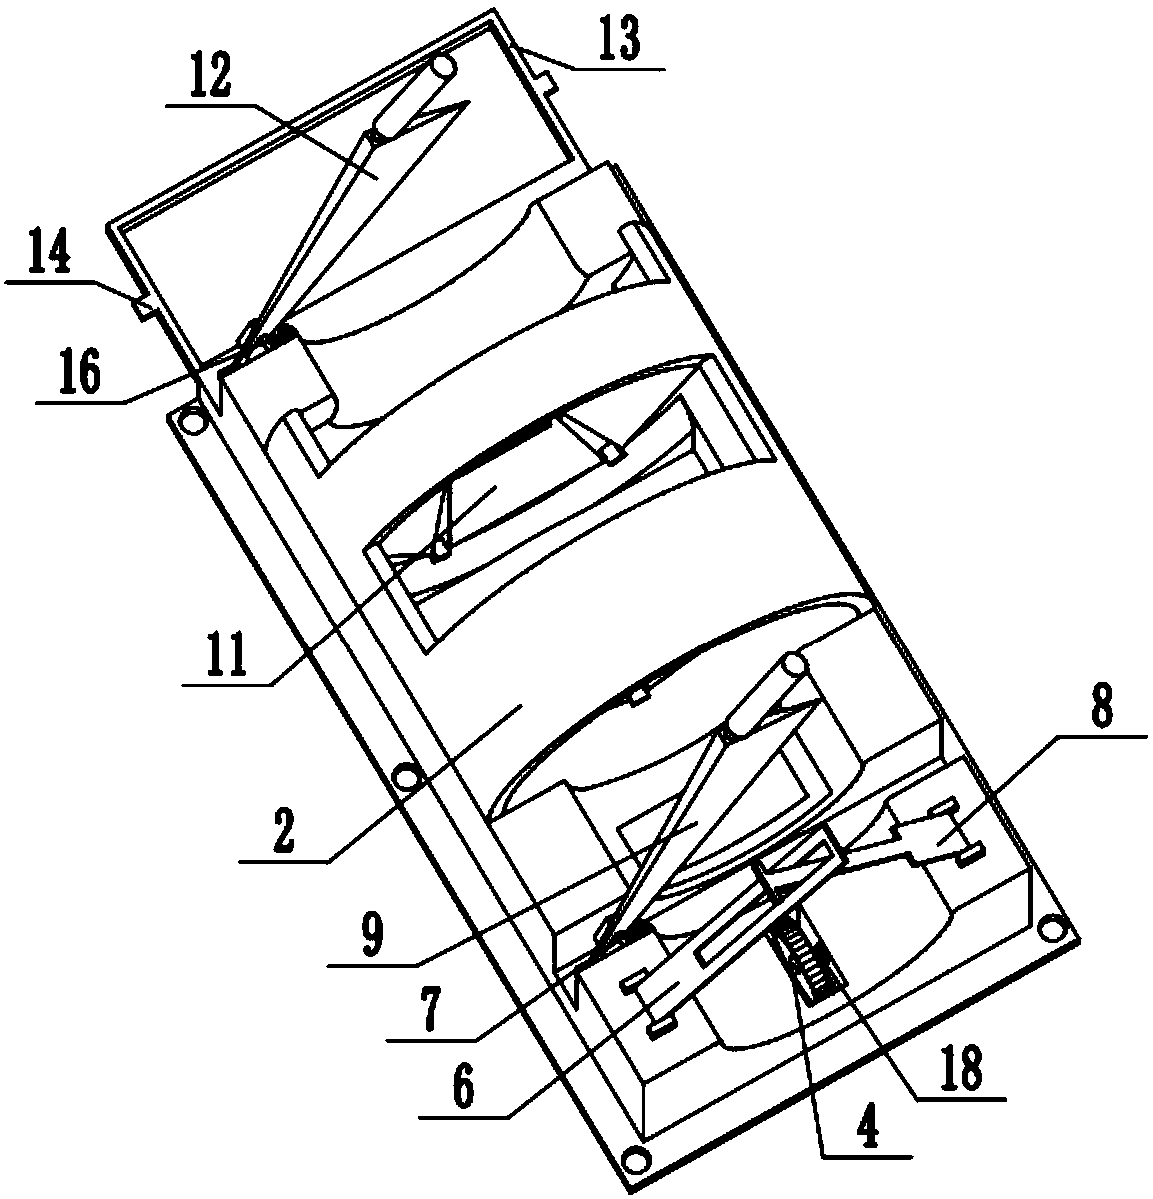 Sugarcane peeling and section cutting device